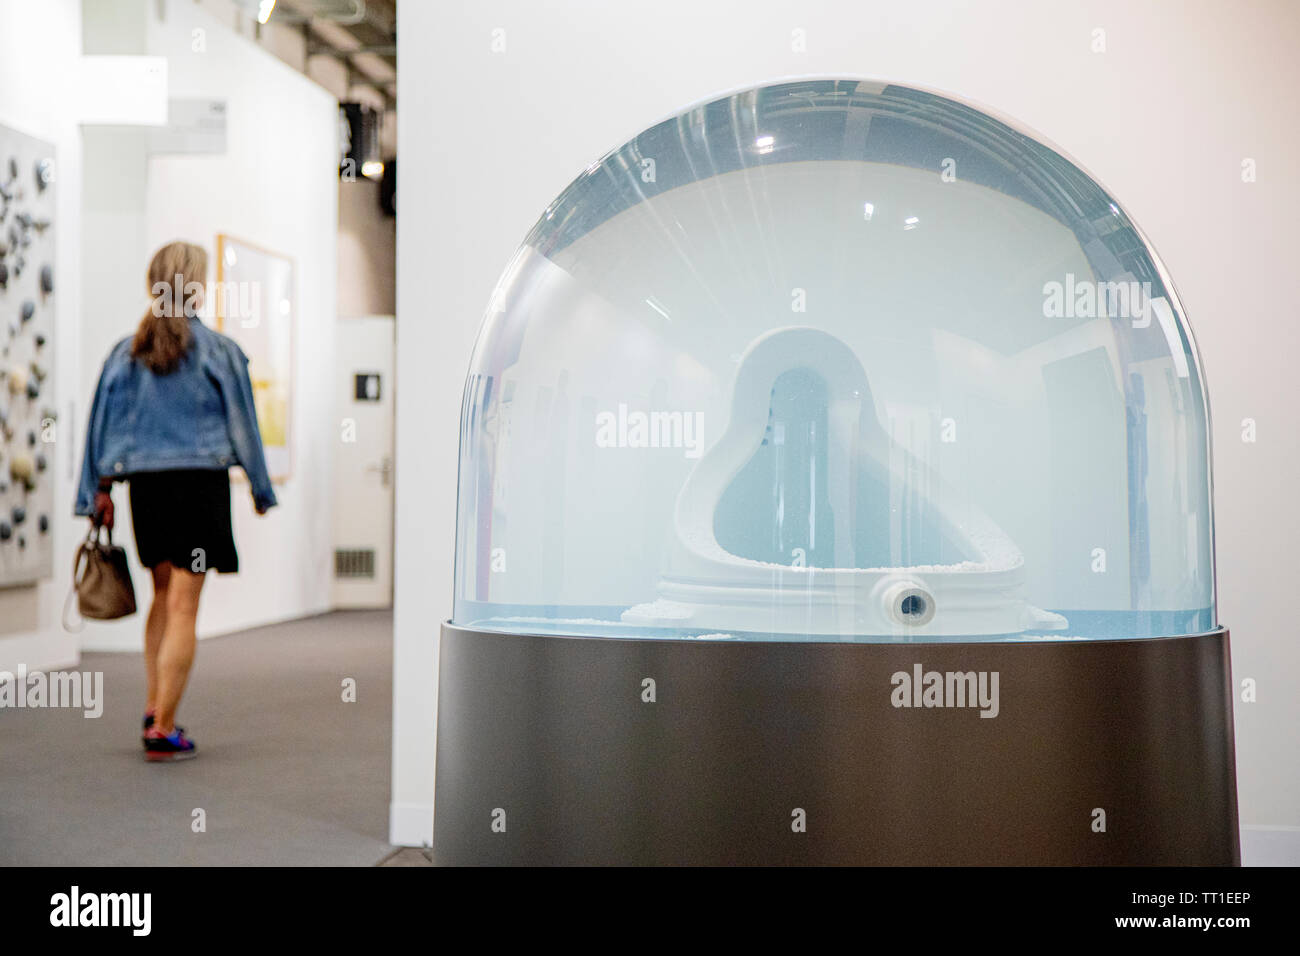 With a reference to Marcel Duchamp, a pissoir has been placed inside a giant snow globe in the installation 'Reason (or Winter) by the artist Berthan Huws, featured by Gallerie Tschudi at the 49th annual Art Basel art fair in Basel. Stock Photo